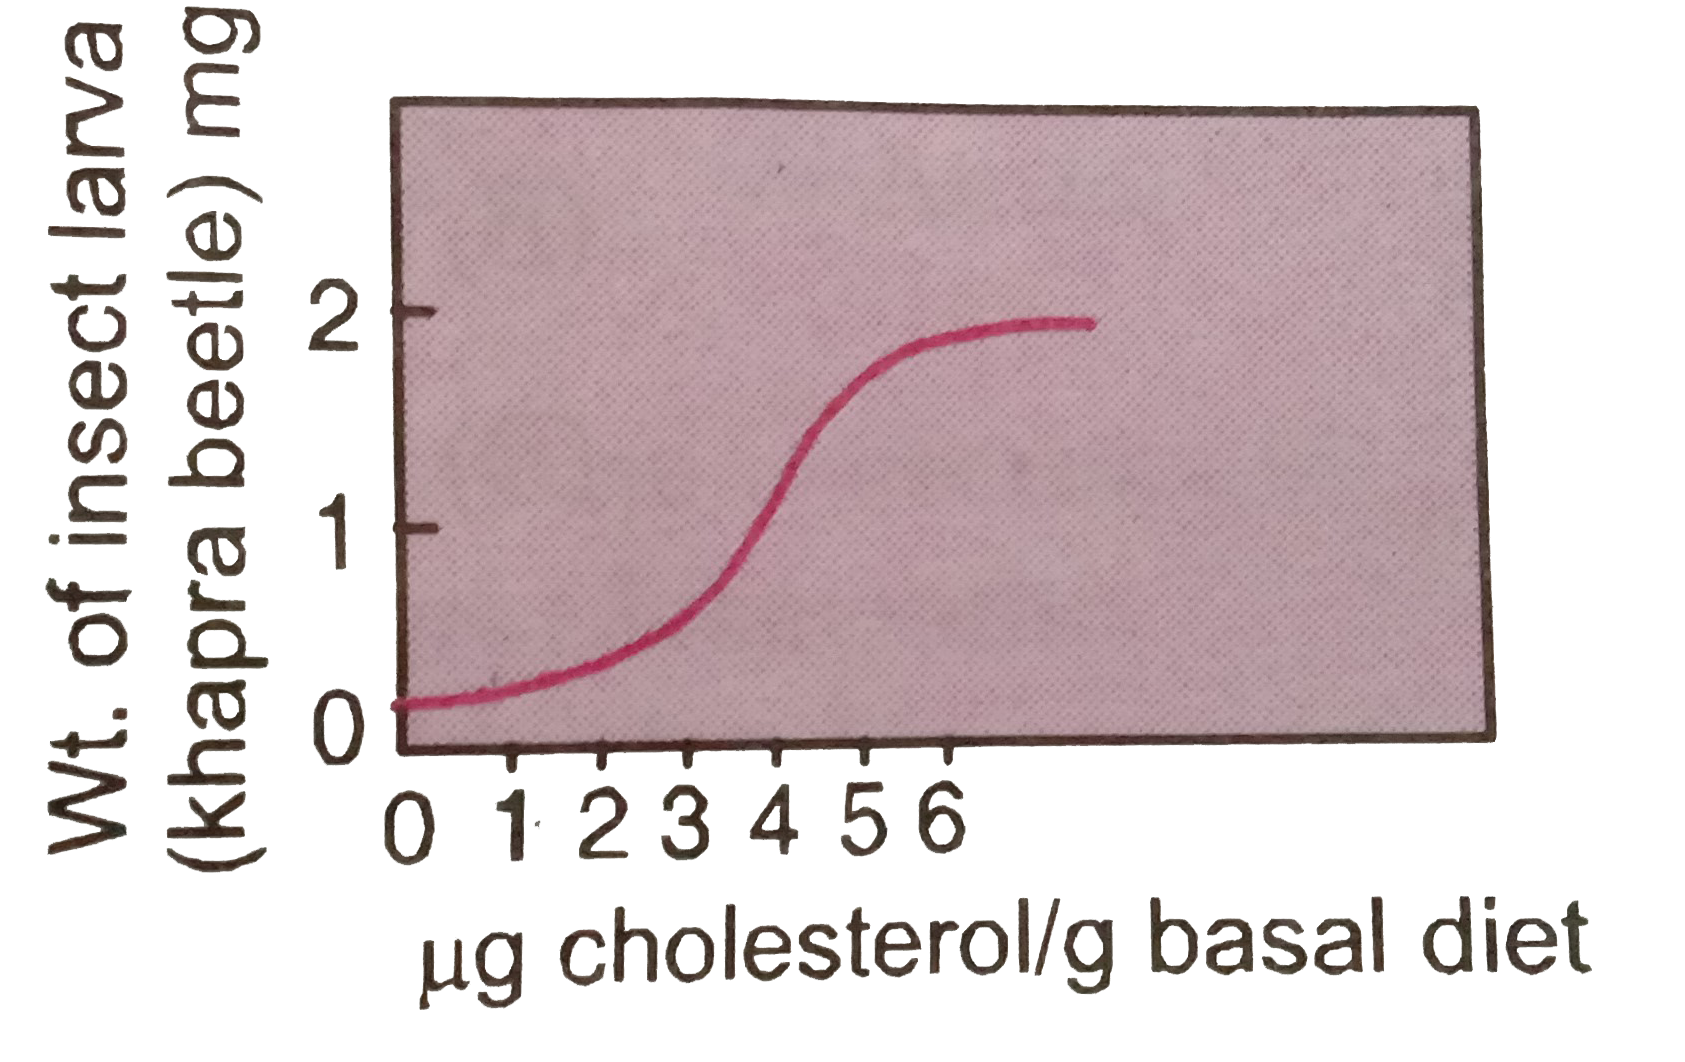 Khapra beetle larvae were raised on basal diet to which was added increasing amount of cholesterol. The result is shown in the accompanying graph. It indicates